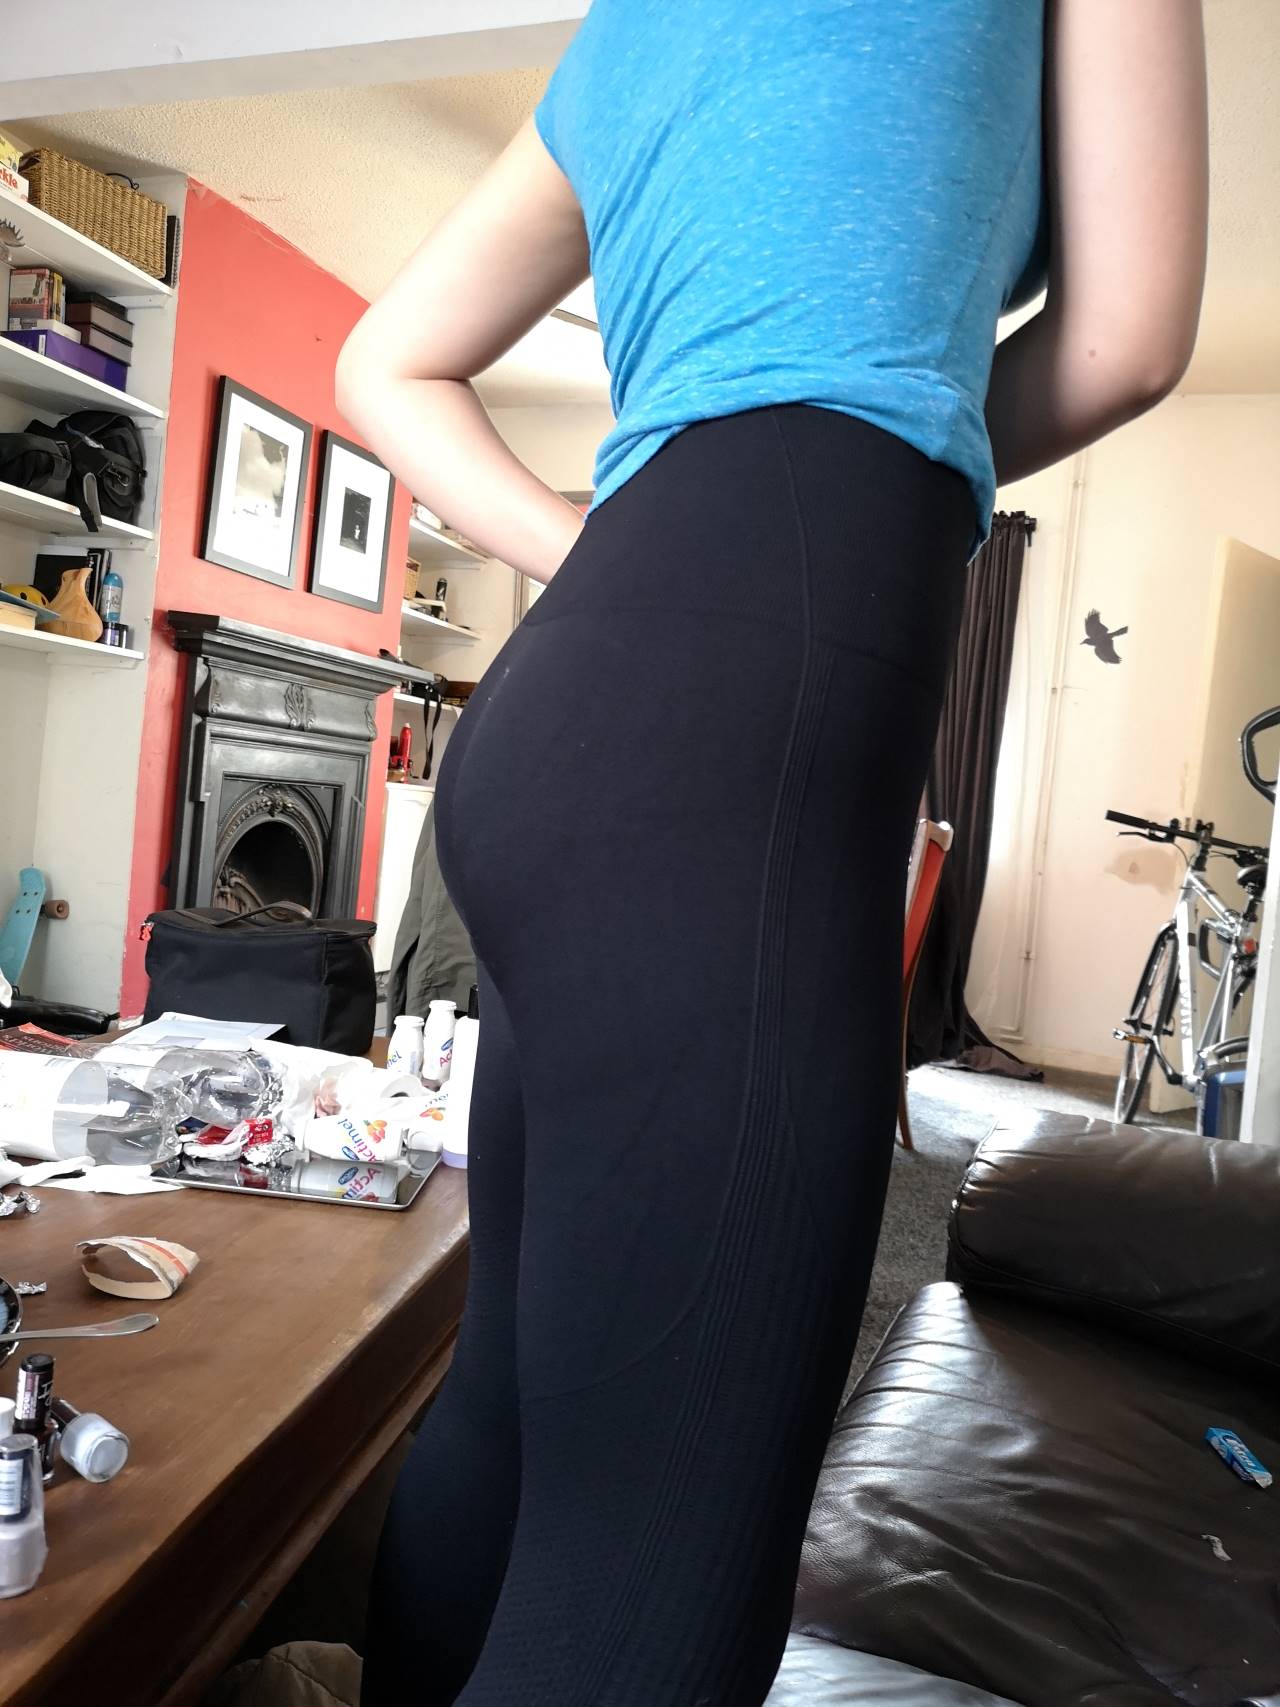 Nice fit & feel, but odd pattern/ribbed fabric on parts of the leggings